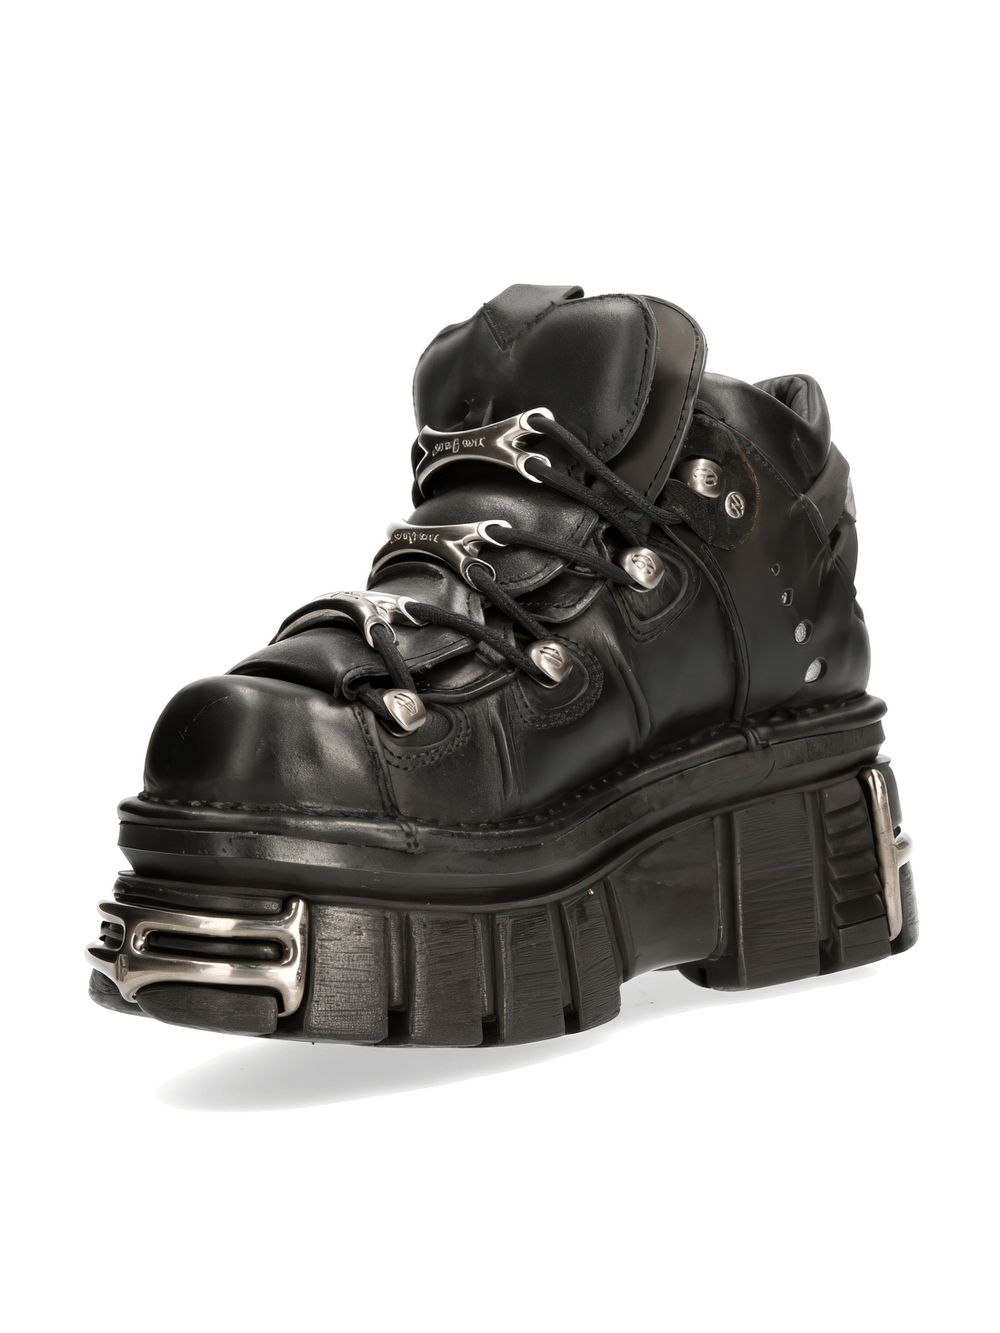 NEW ROCK Black Rocker Ankle Boots with Heavy Details